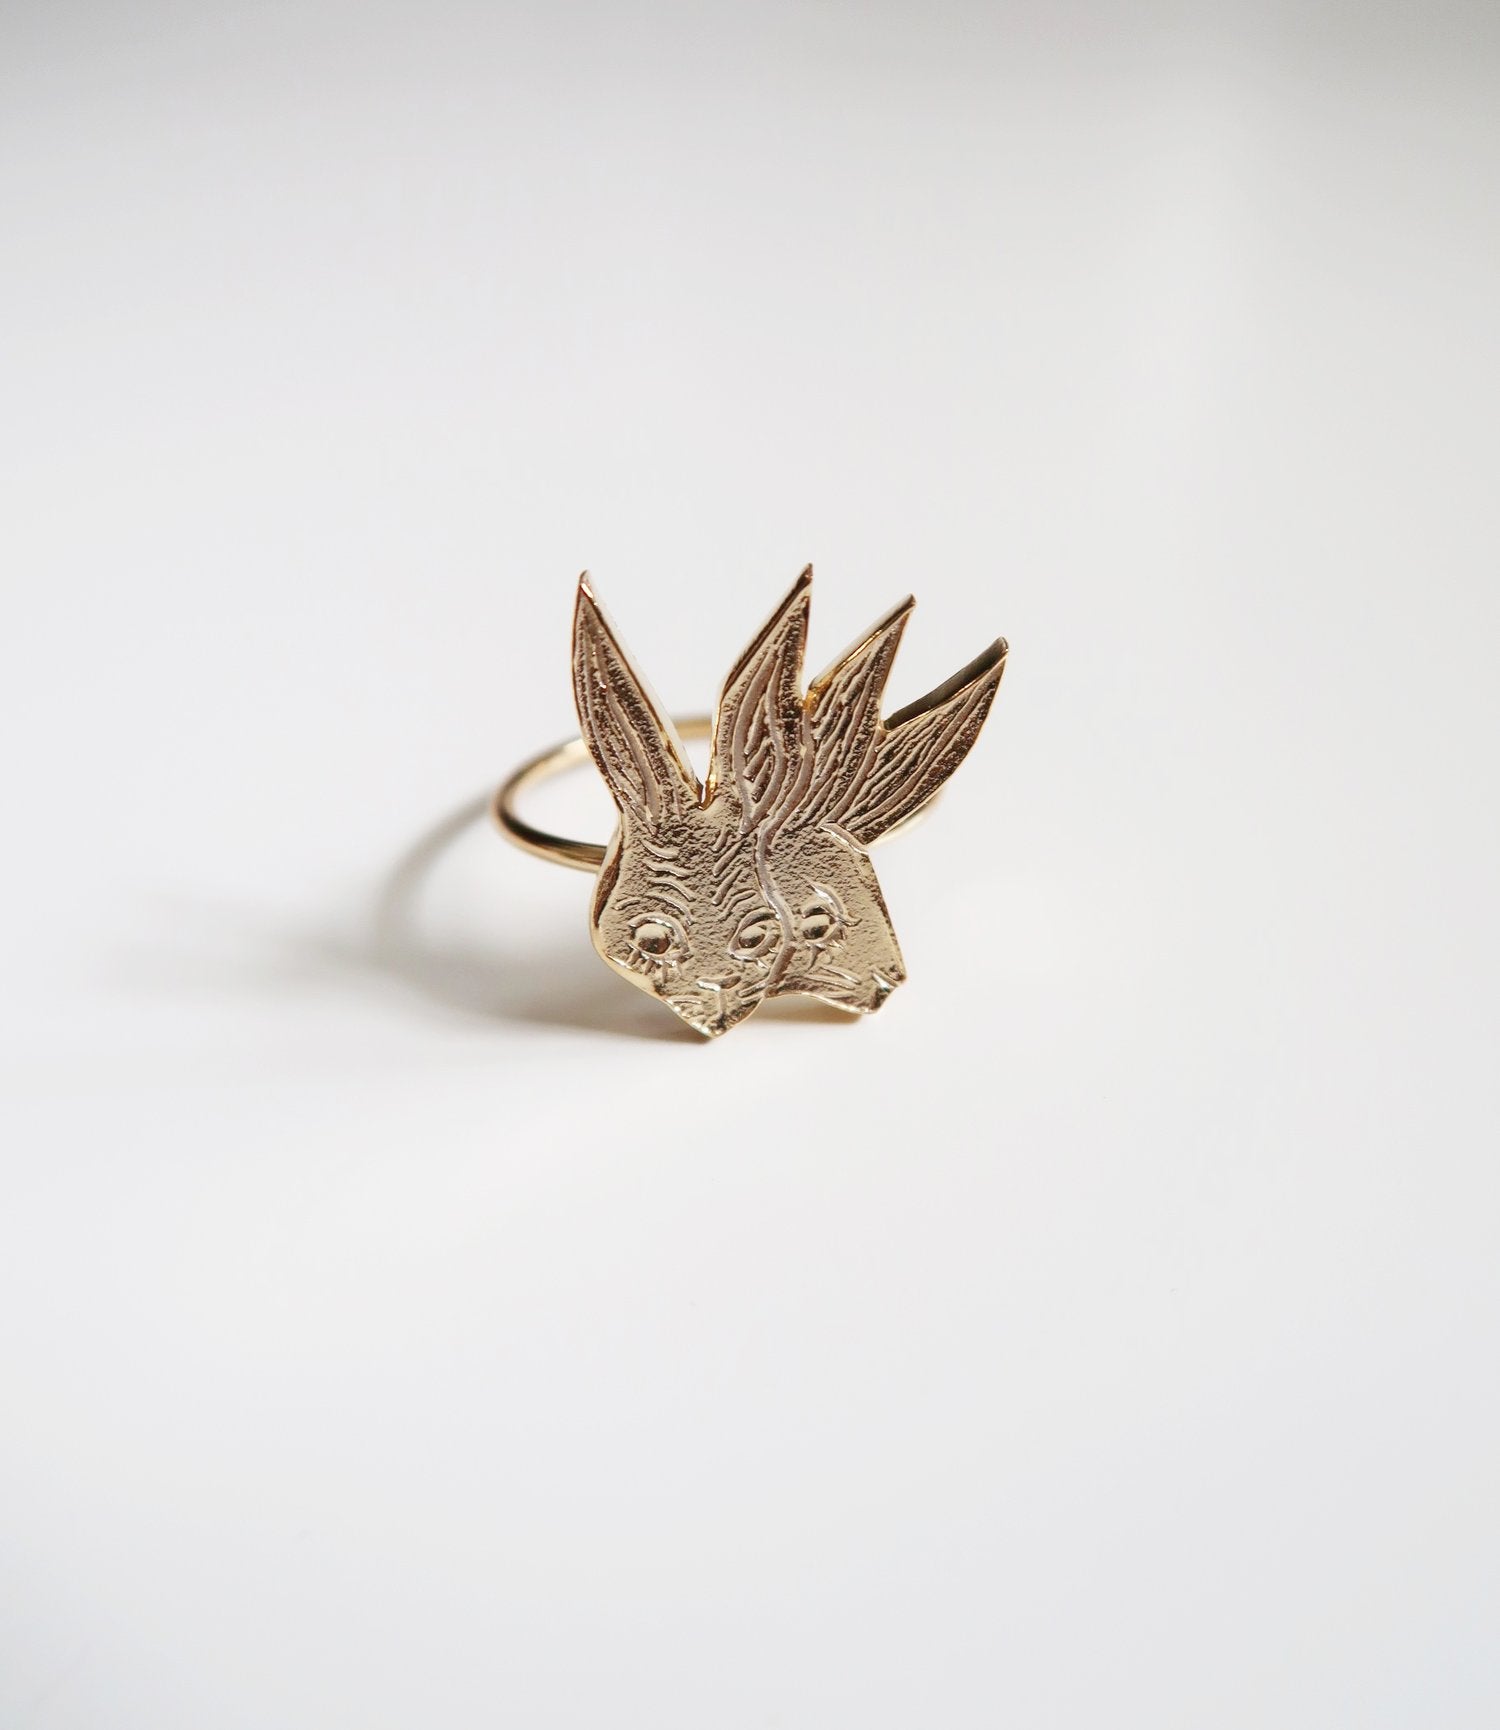 Two-Headed Rabbit Ring - Magpie Jewellery